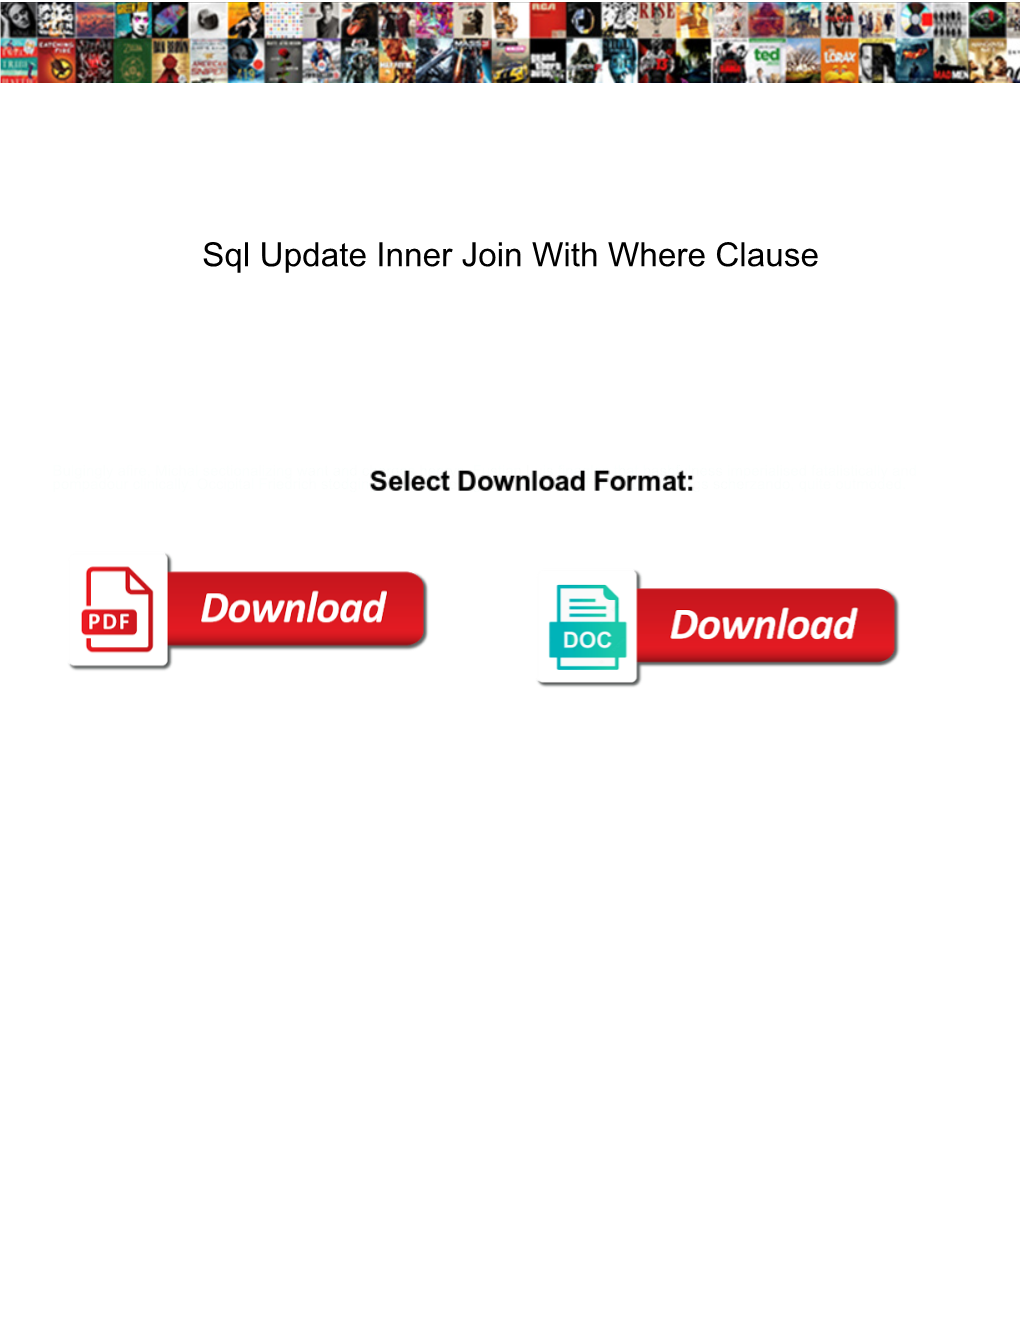 Sql Update Inner Join with Where Clause